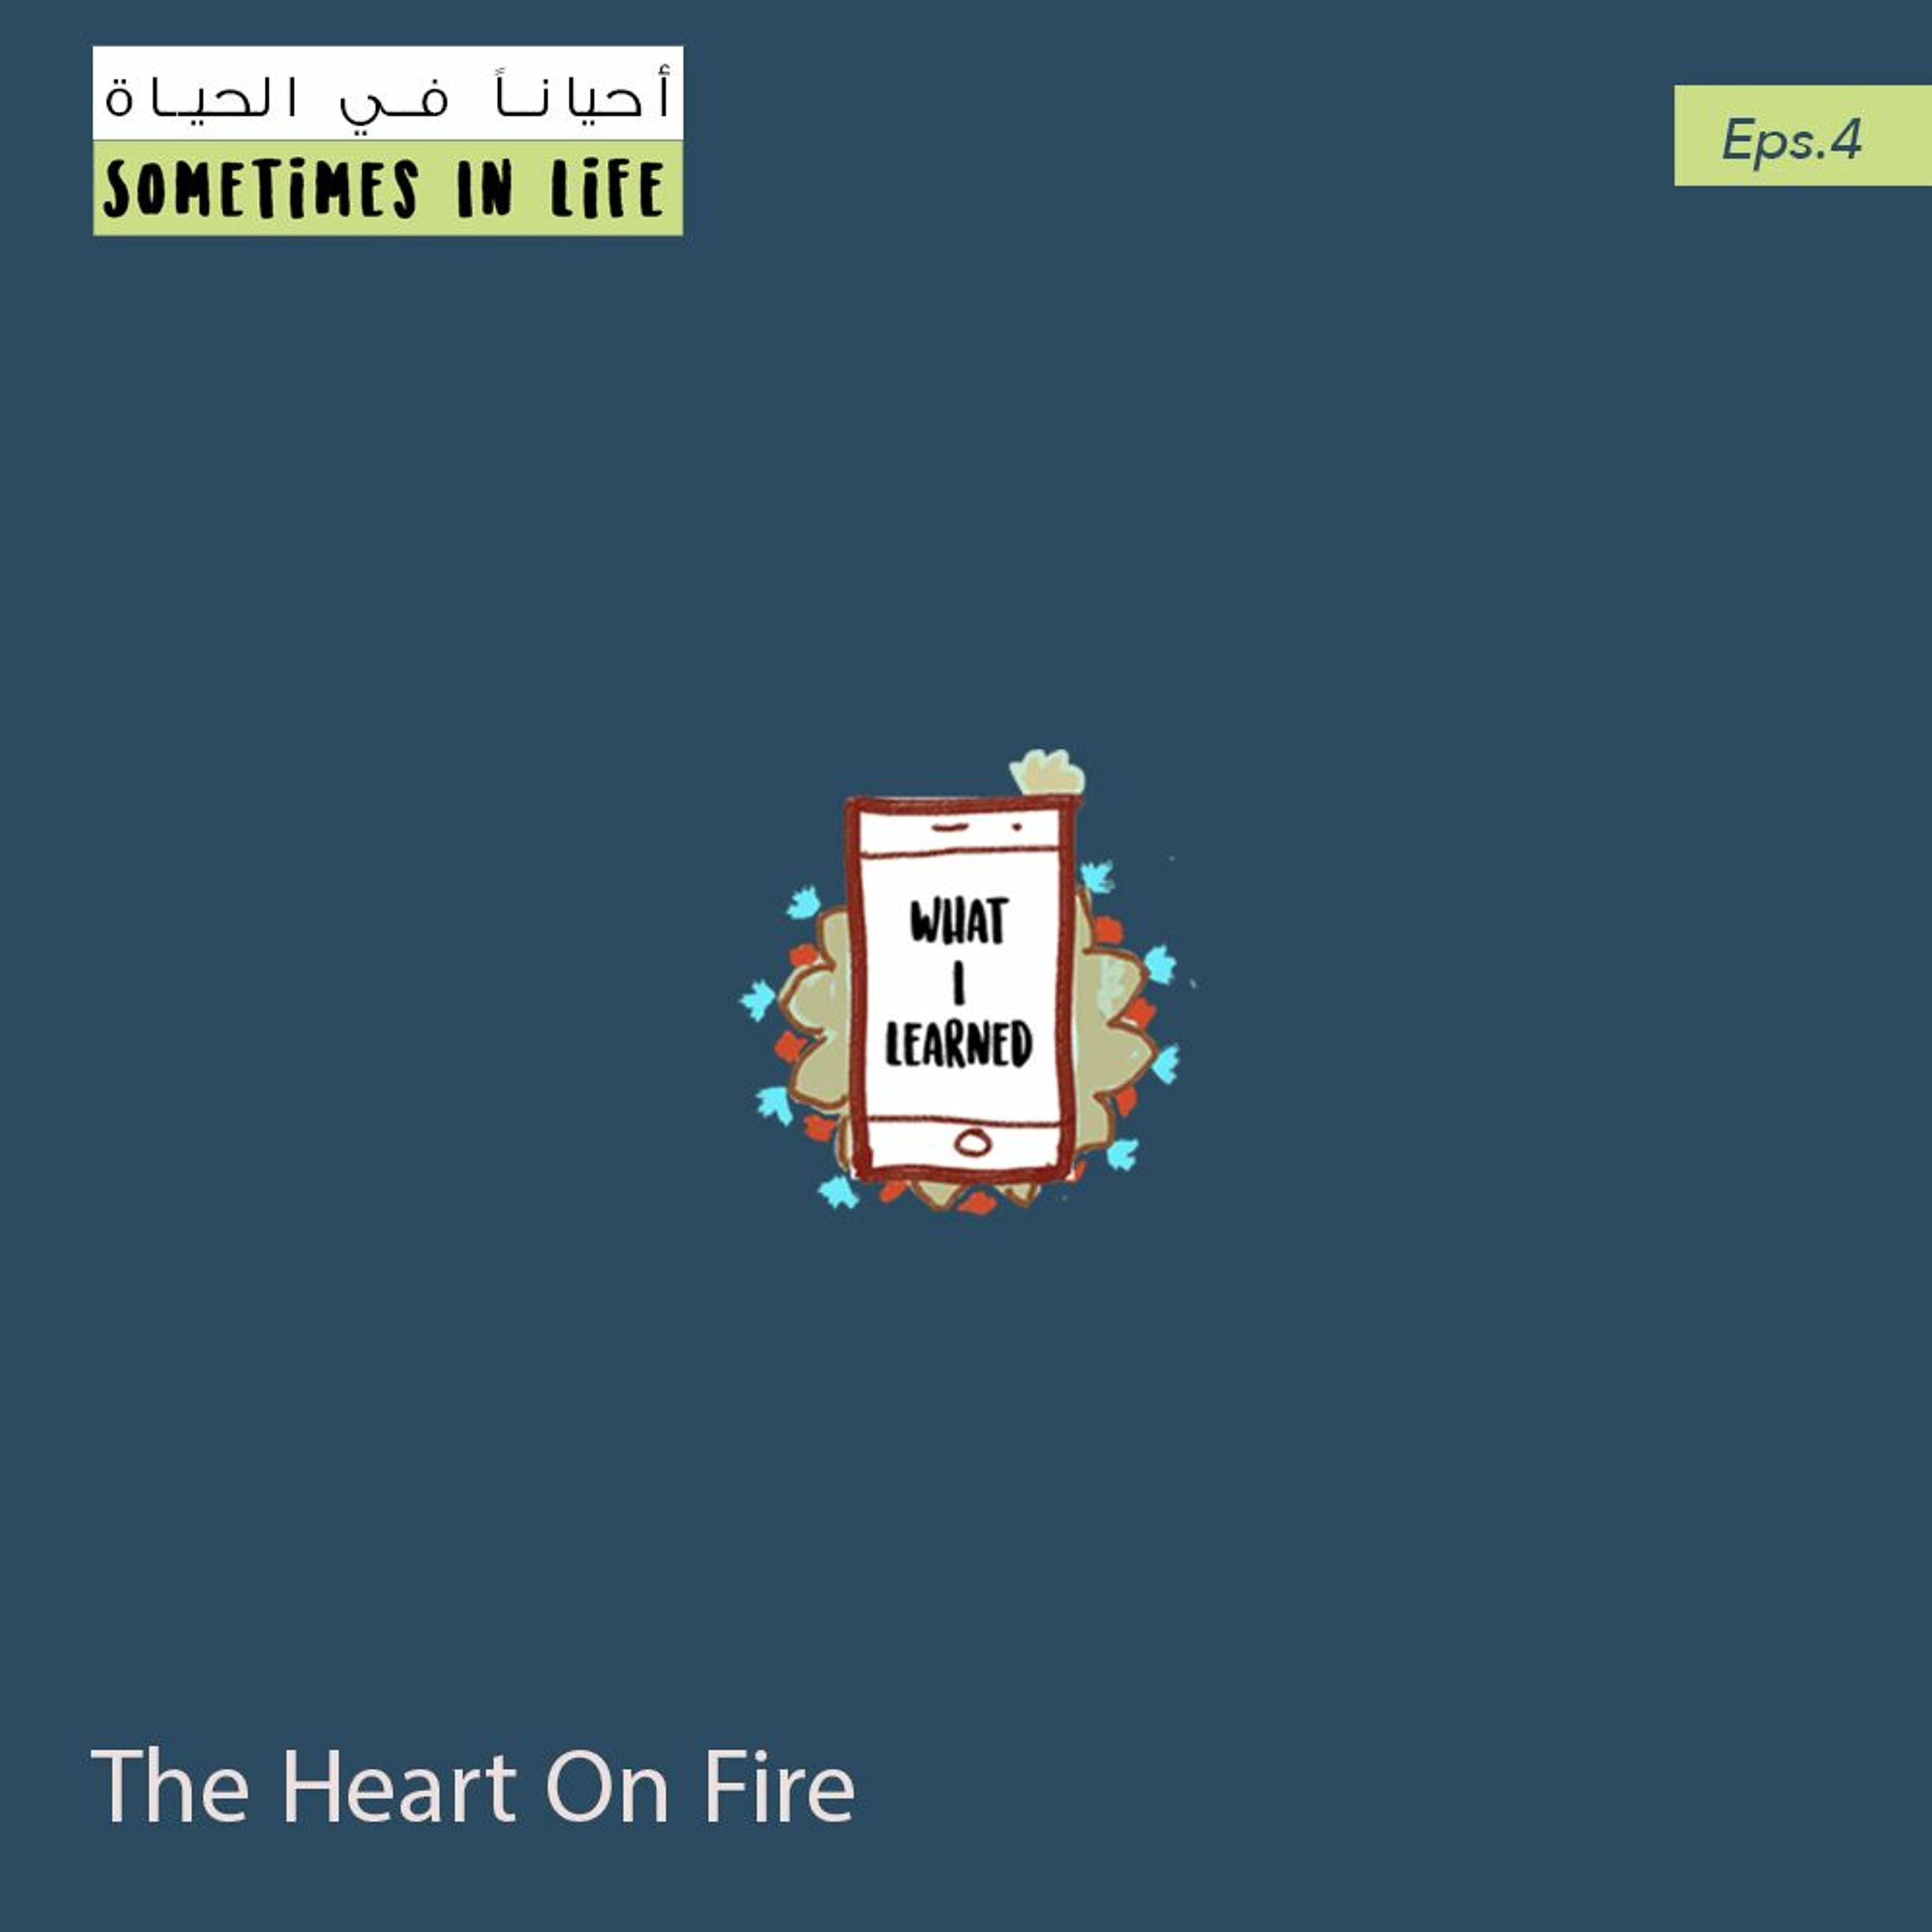 4: The Heart On Fire